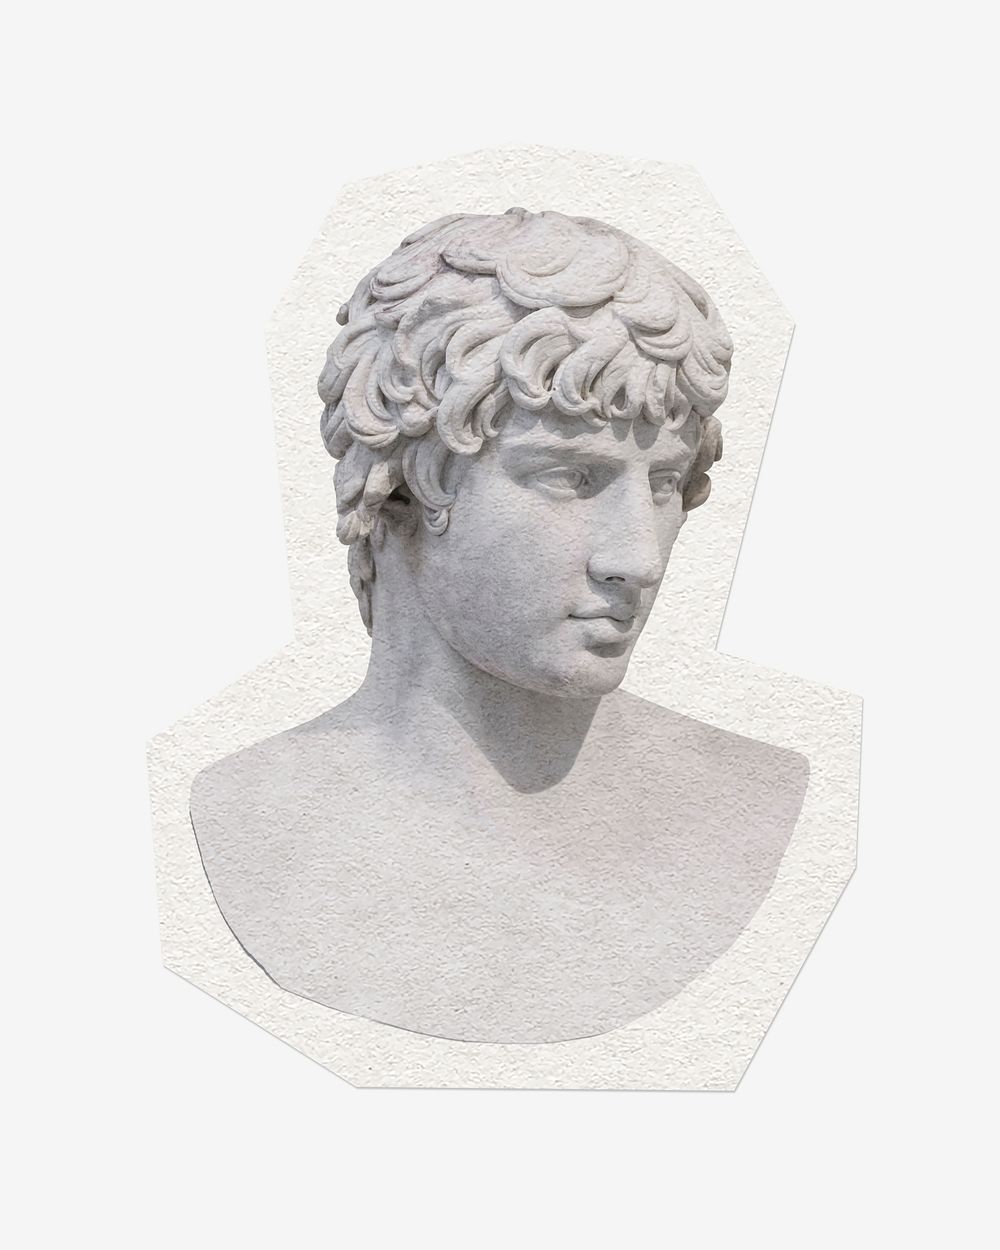 Antinous statue, cut out paper design, off white graphic